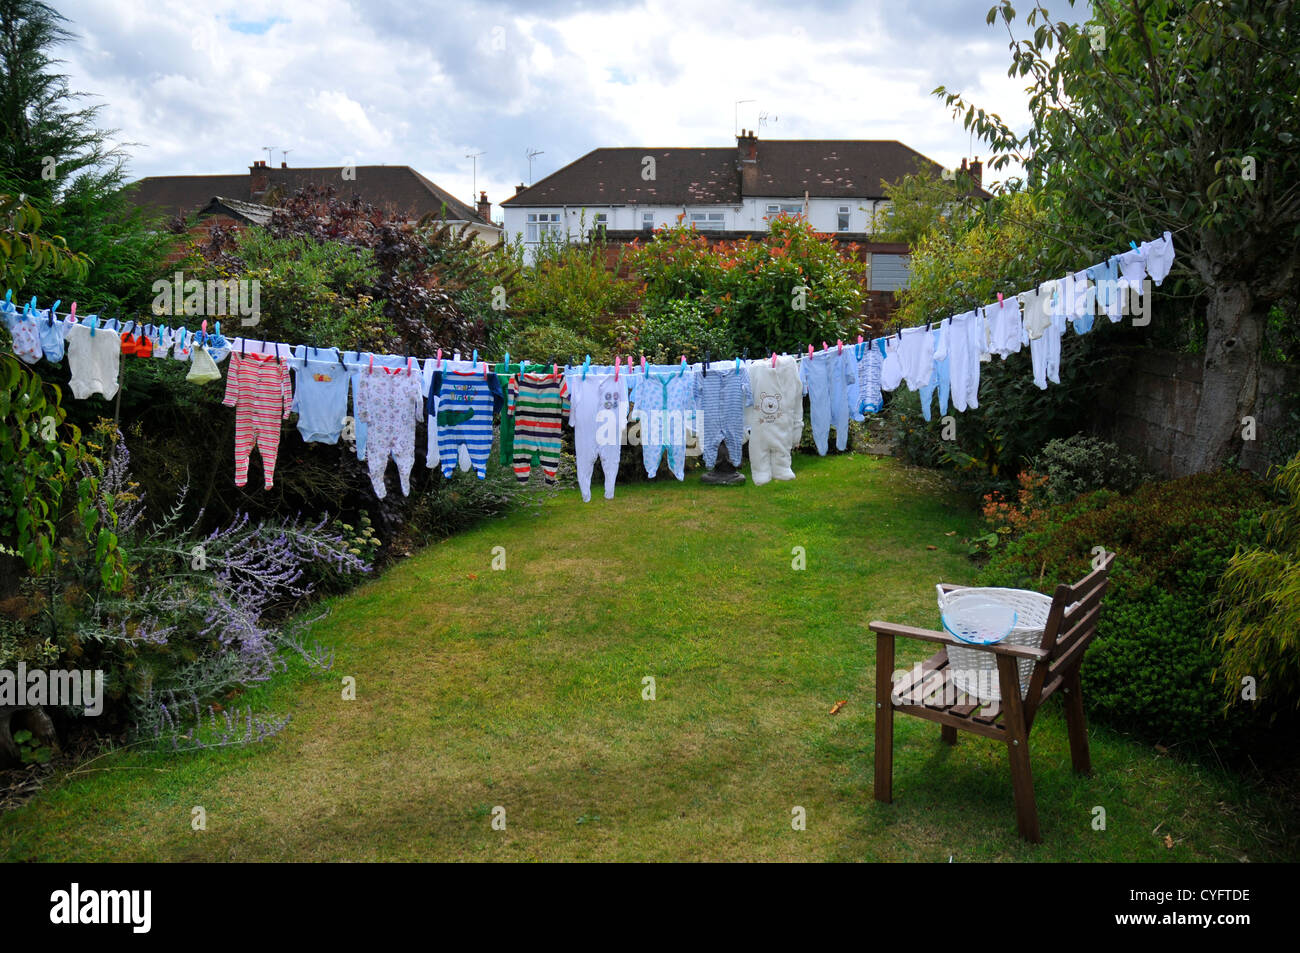 A washing-line full of baby clothes ready for a new arrival. Stock Photo